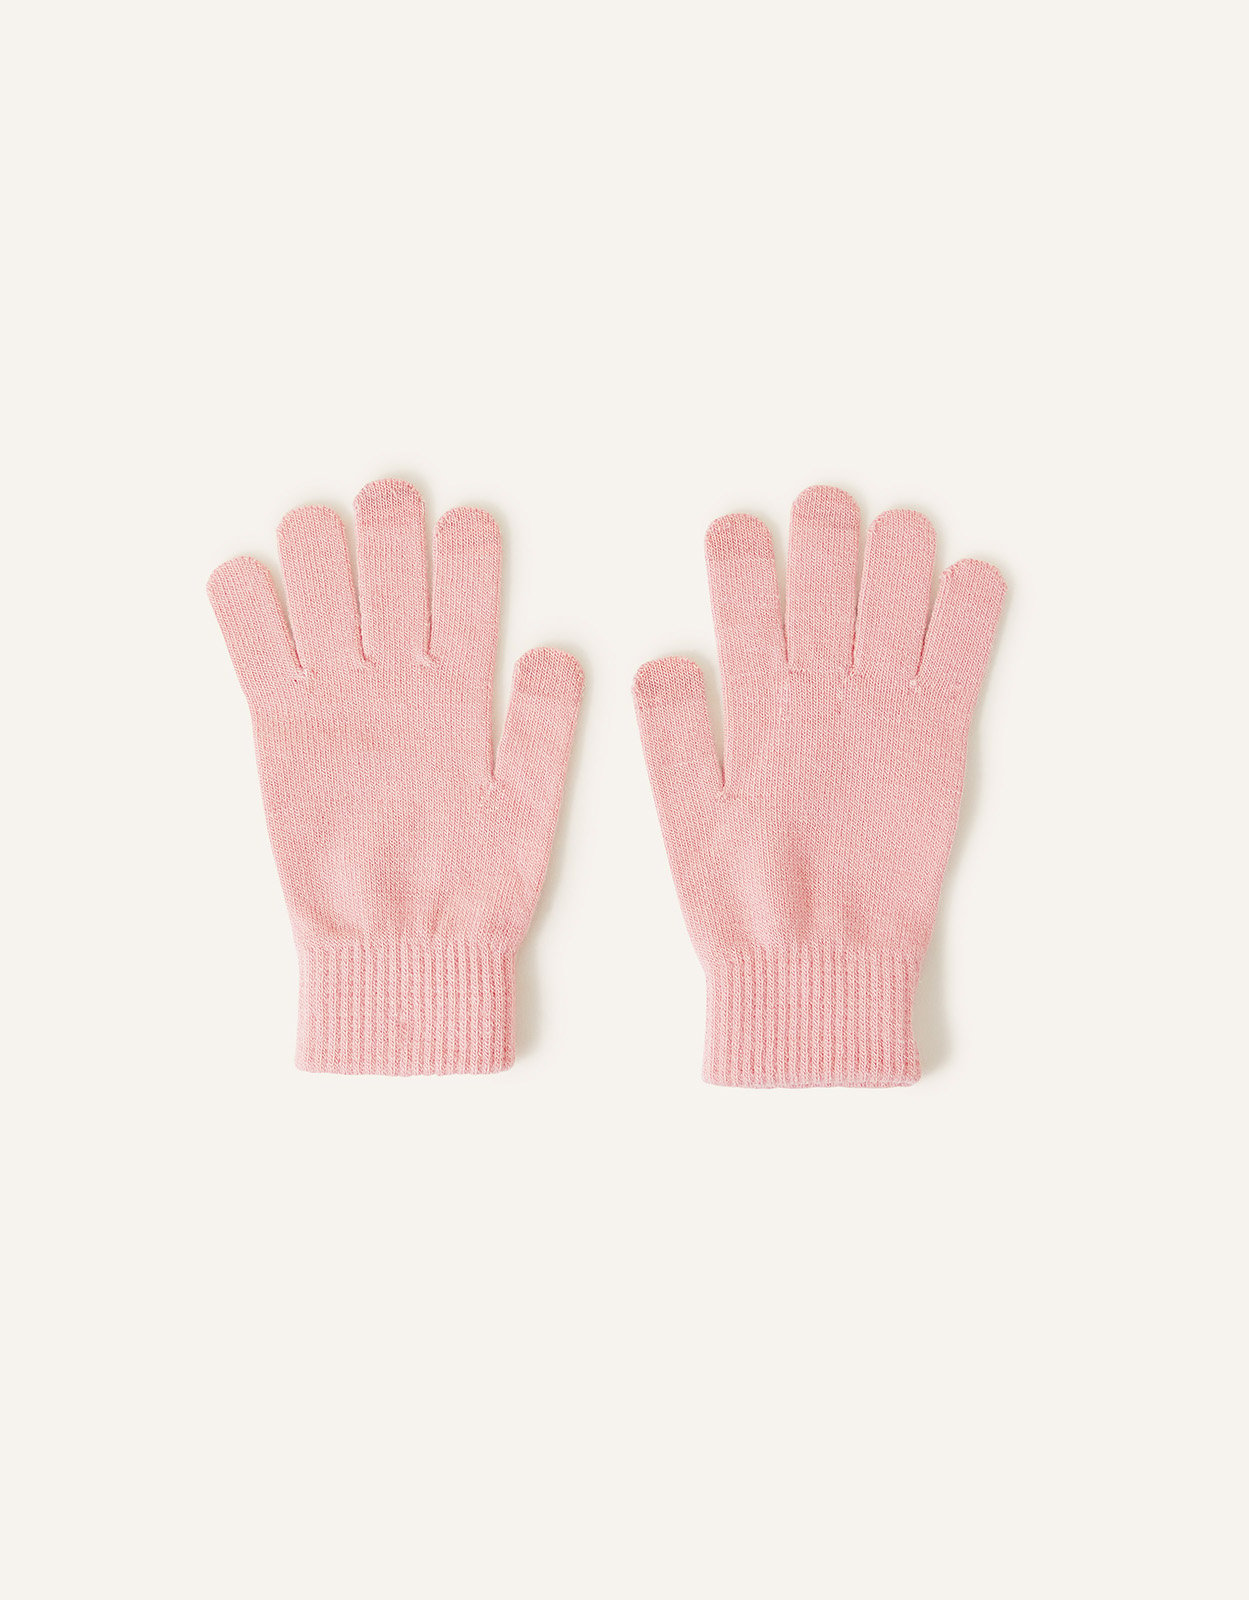 Accessorize Pink Super Stretch Touch Gloves, Size: One Size